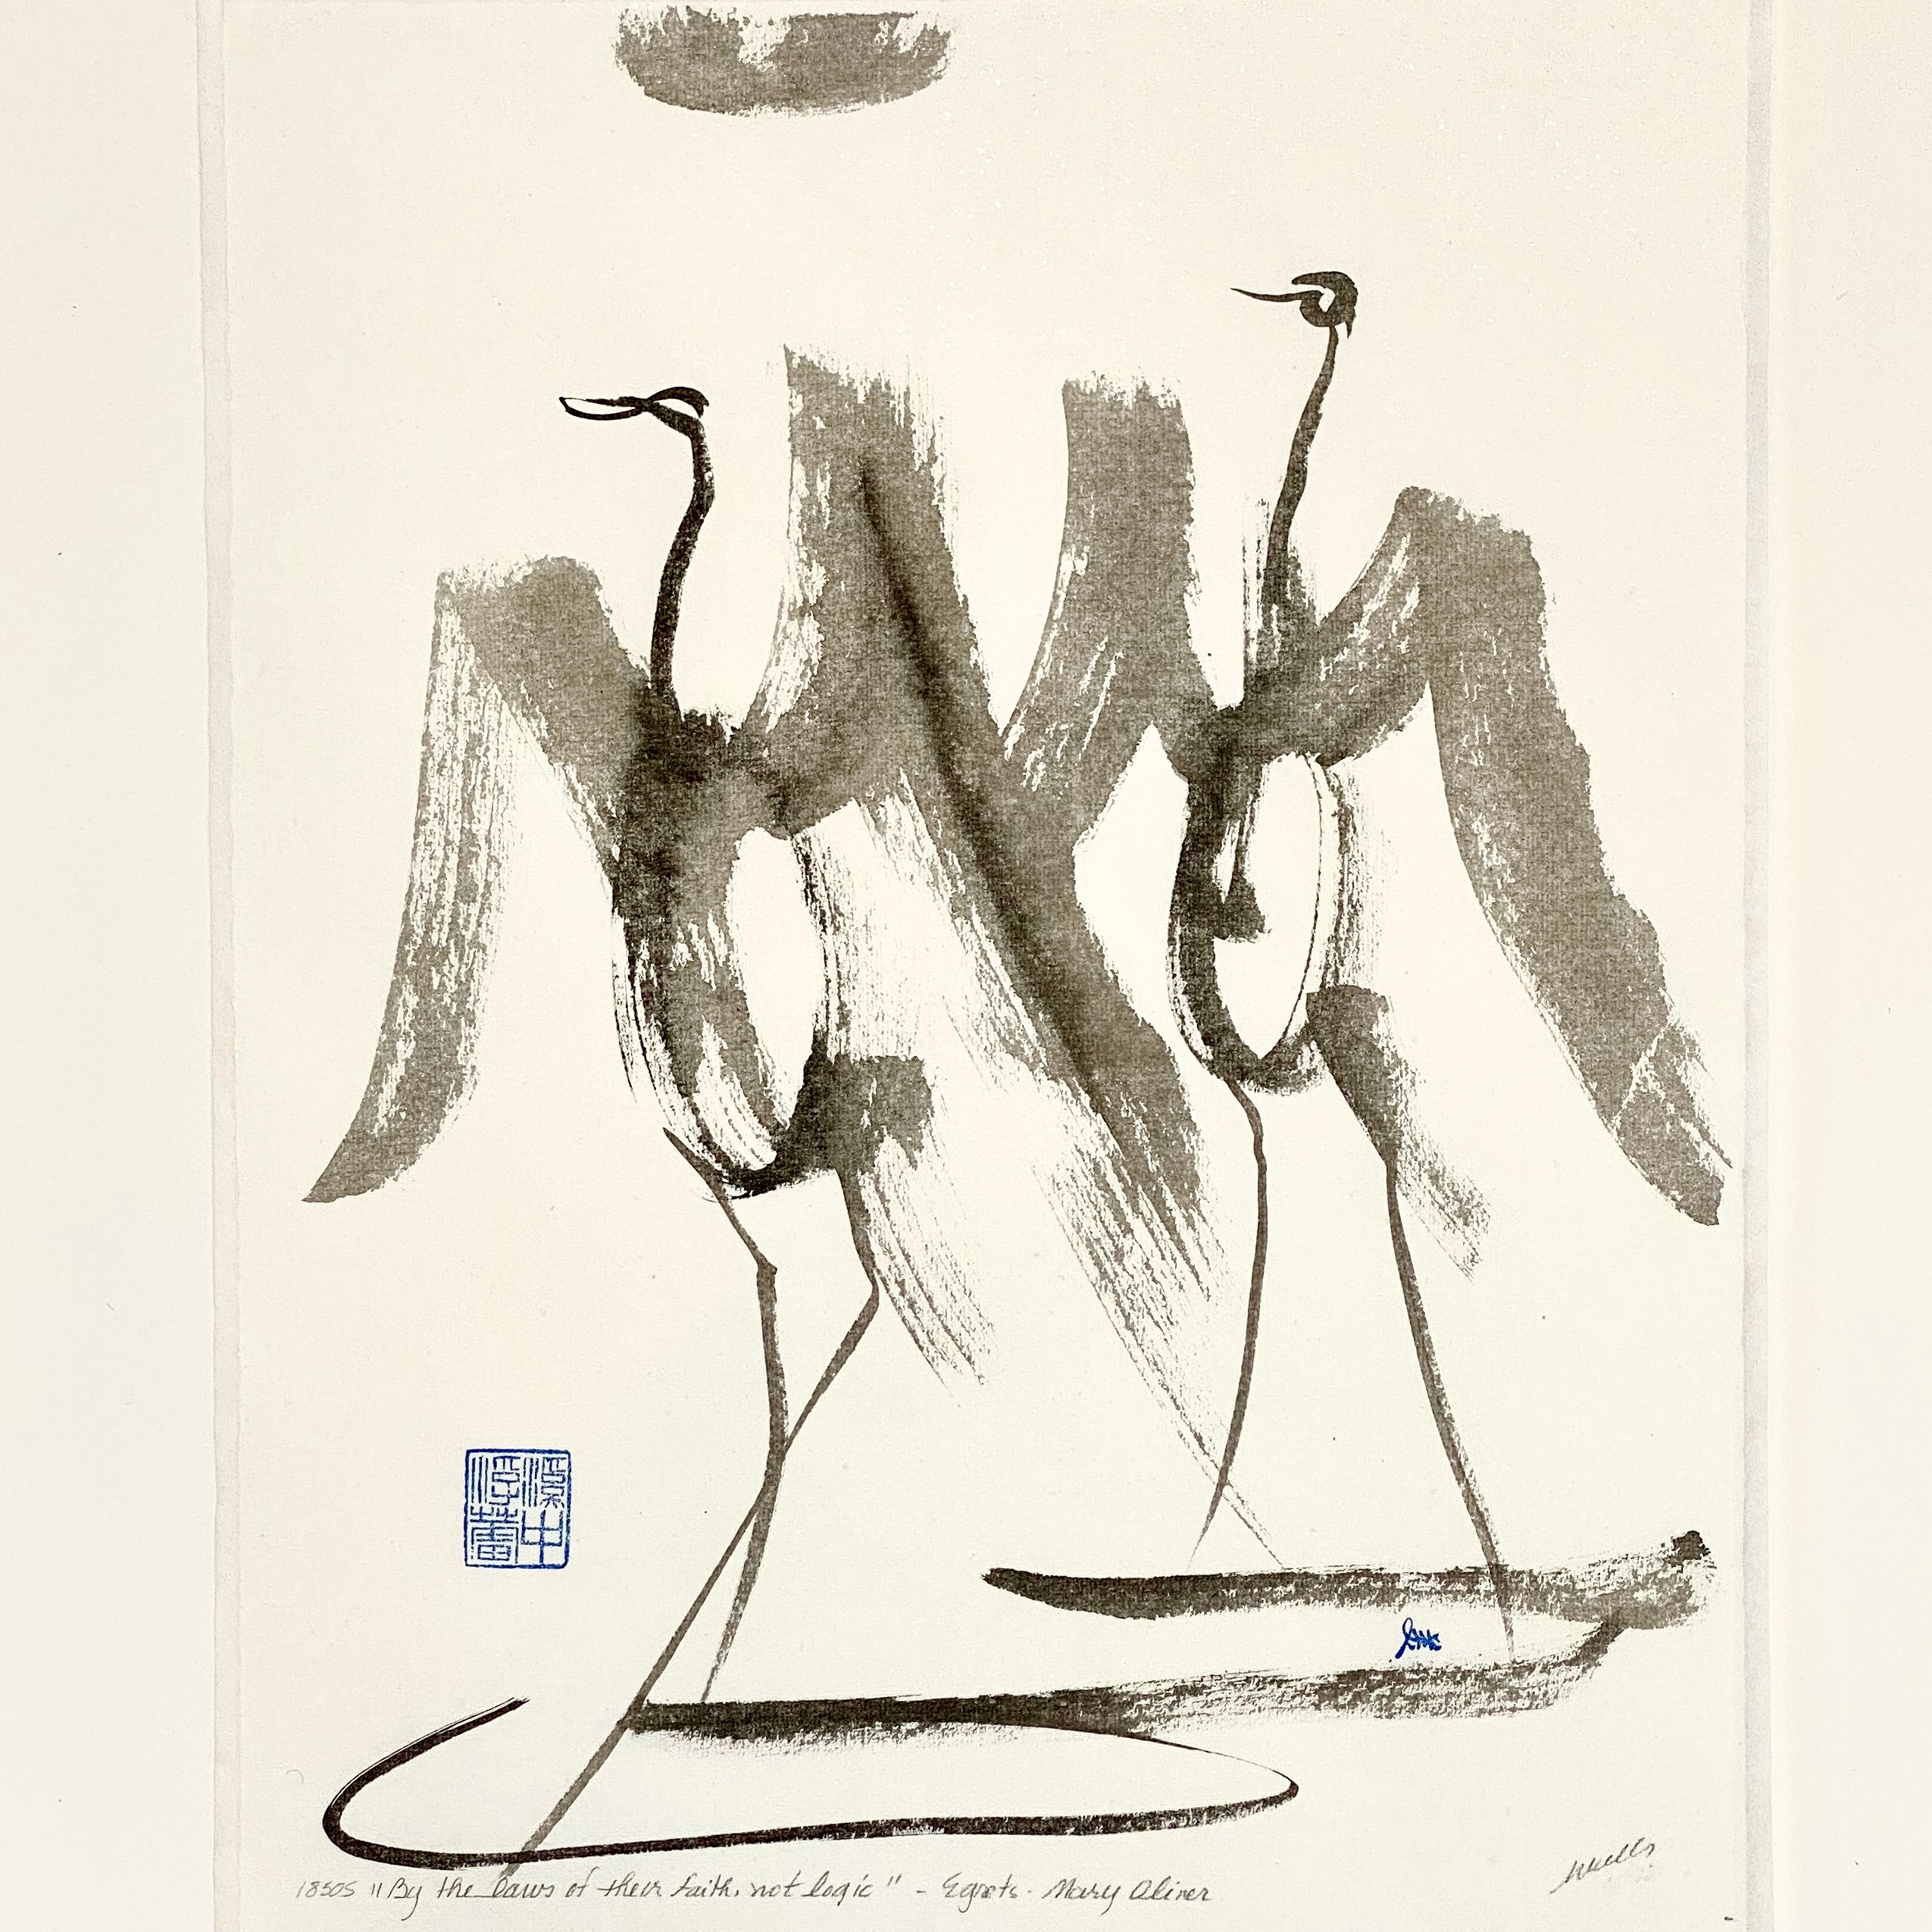 abstract sumi e by marilyn wells from Mary Oliver